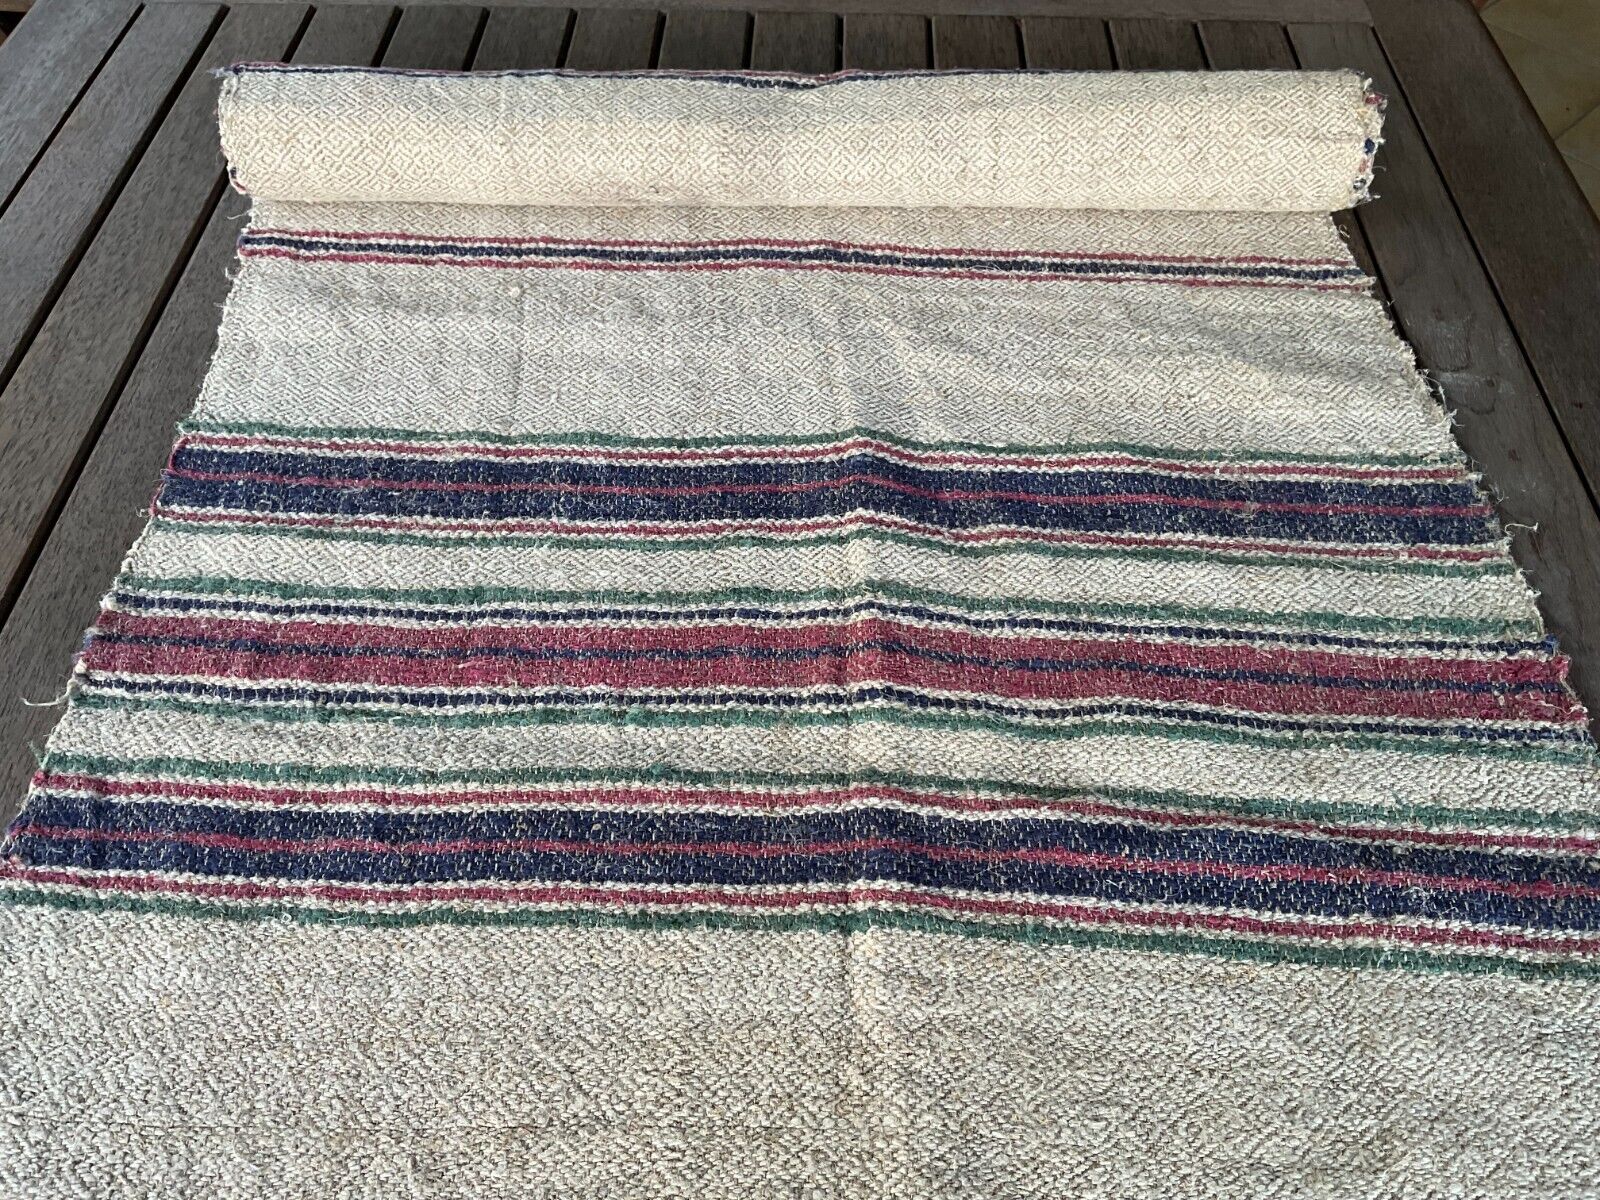 Antique Handwoven Fabric Linen Hemp Textile Striped Rug Upholstery Roll 2.45 yd